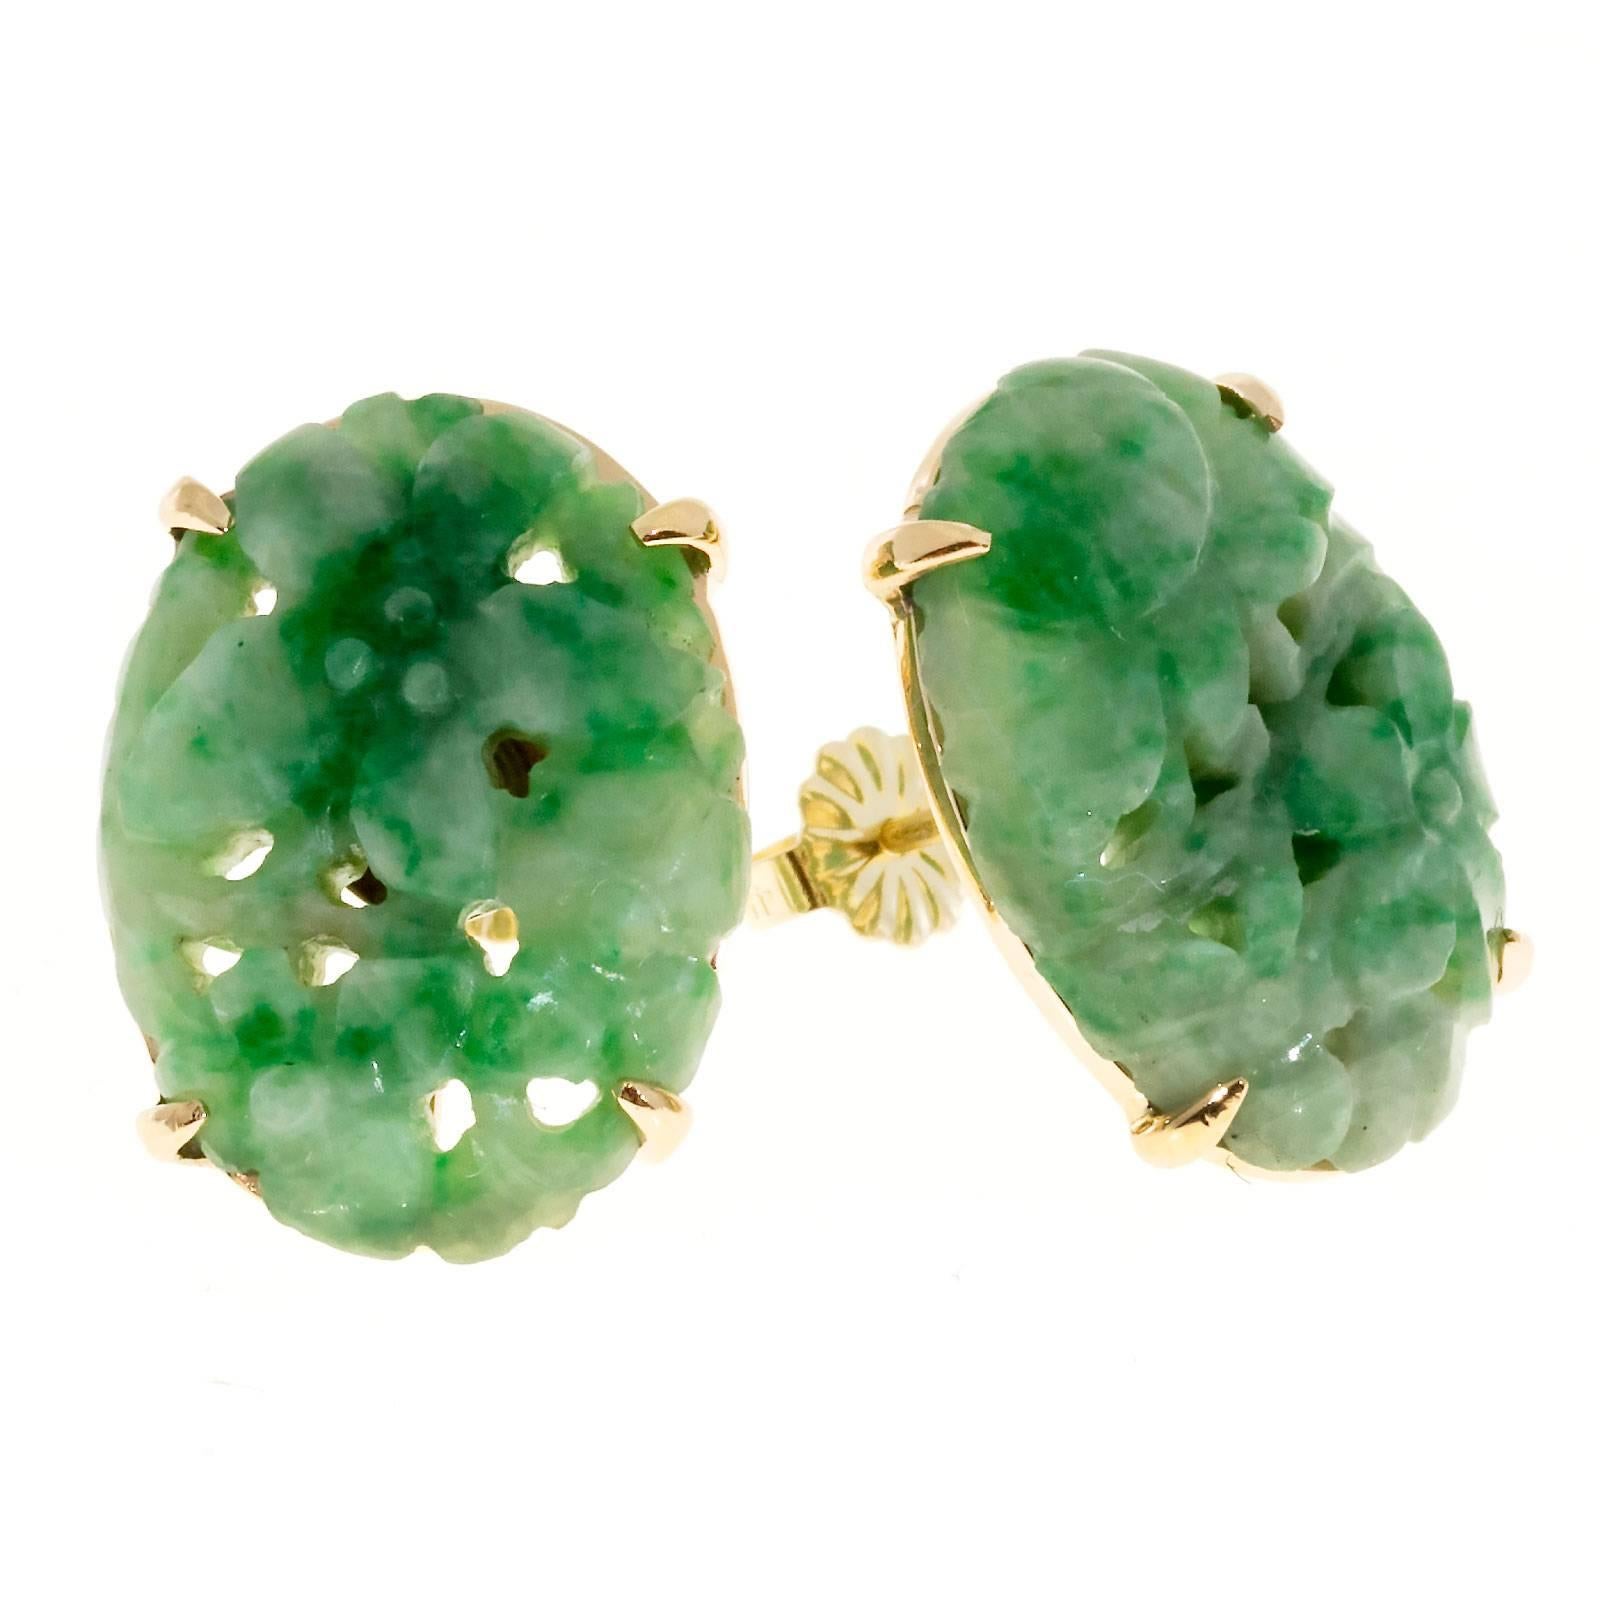 Retro Art Deco round Jade 14k rose gold handmade earrings. 14k yellow posts. Set with GIA certified natural untreated variegated green oval Jadeite Jade oval carvings.

Natural Jadeite Jade 21 x 16.9 x 4mm. Variegated green color.  Natural color